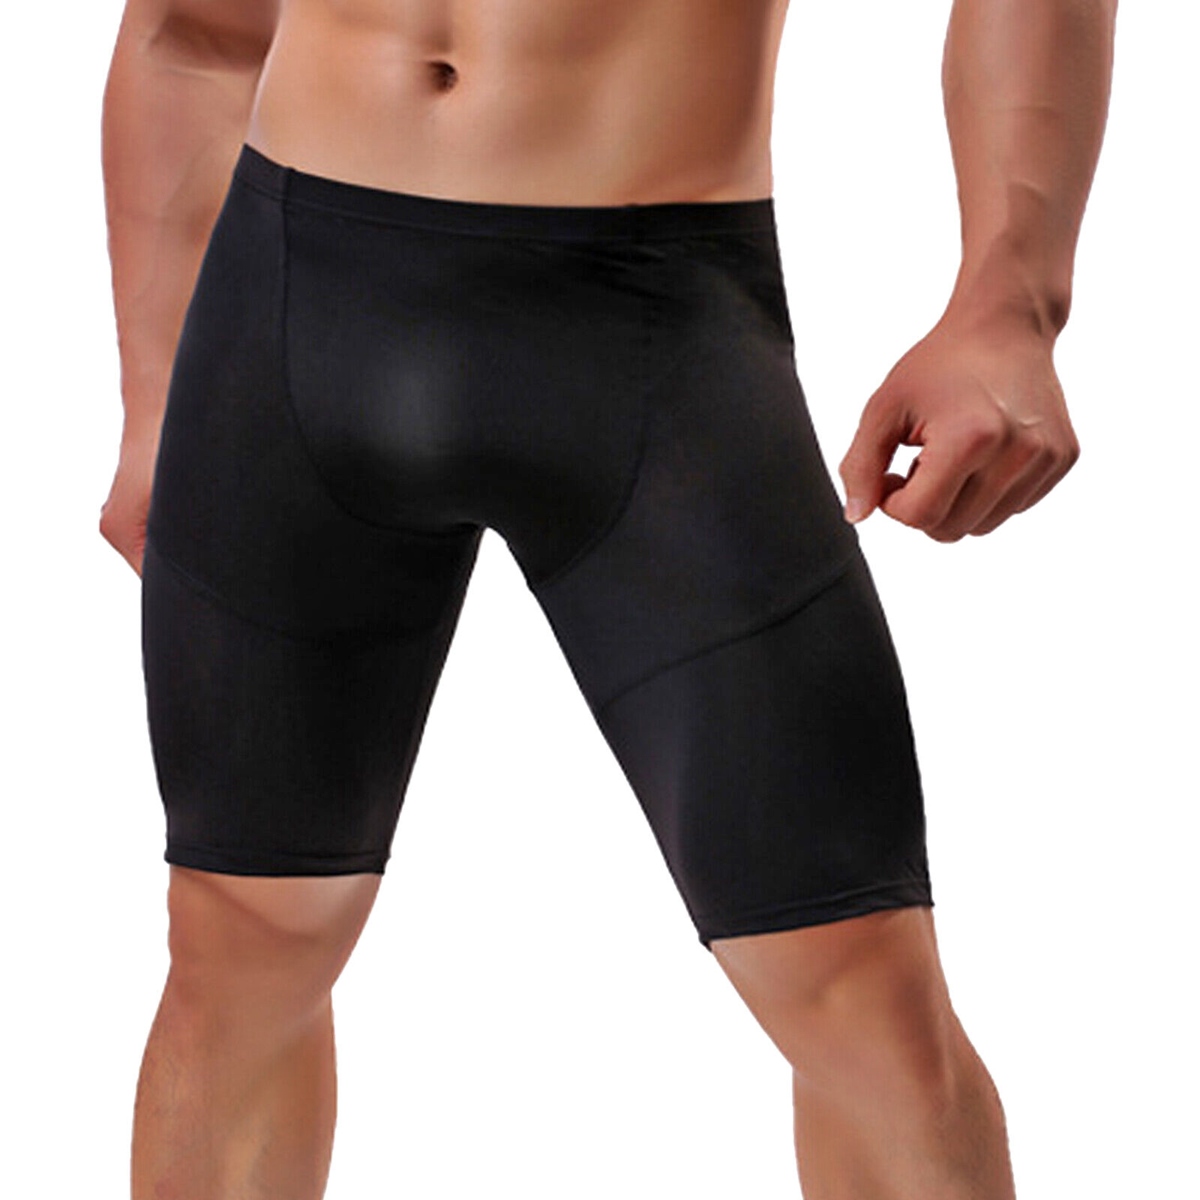 13 Incredible Knee-Length Compression Shorts For 2023